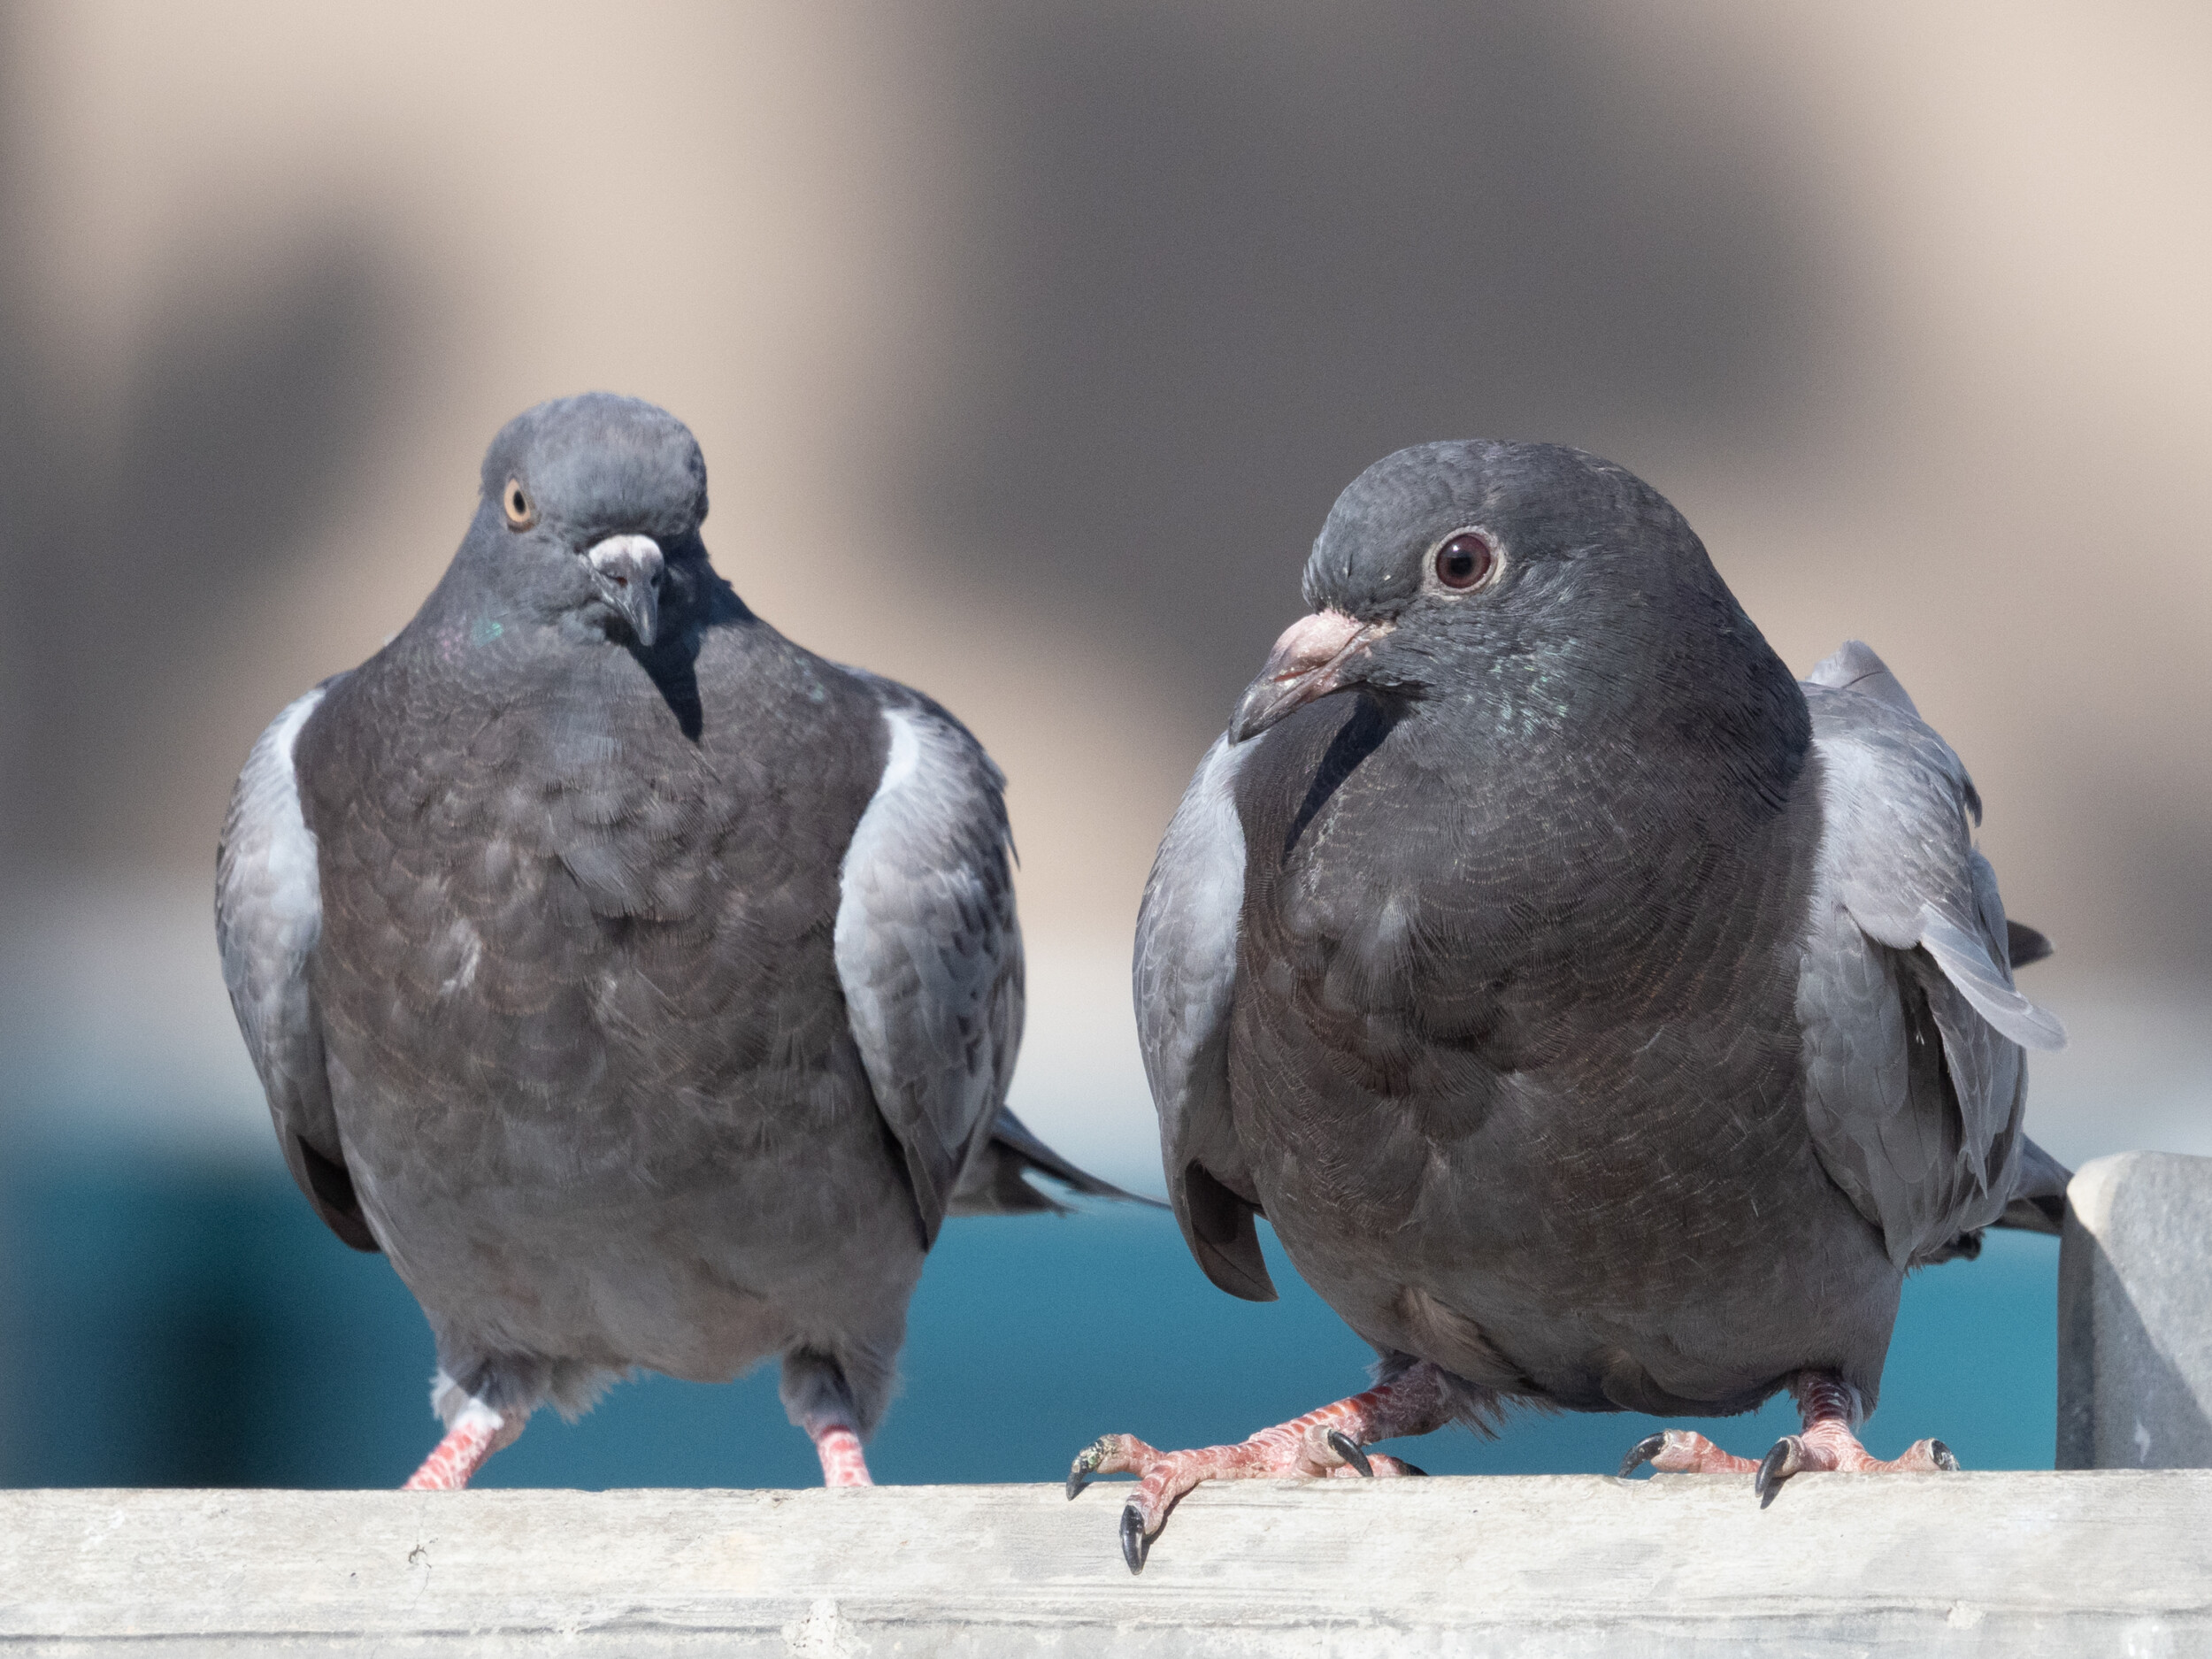 Young Pigeon in Flock